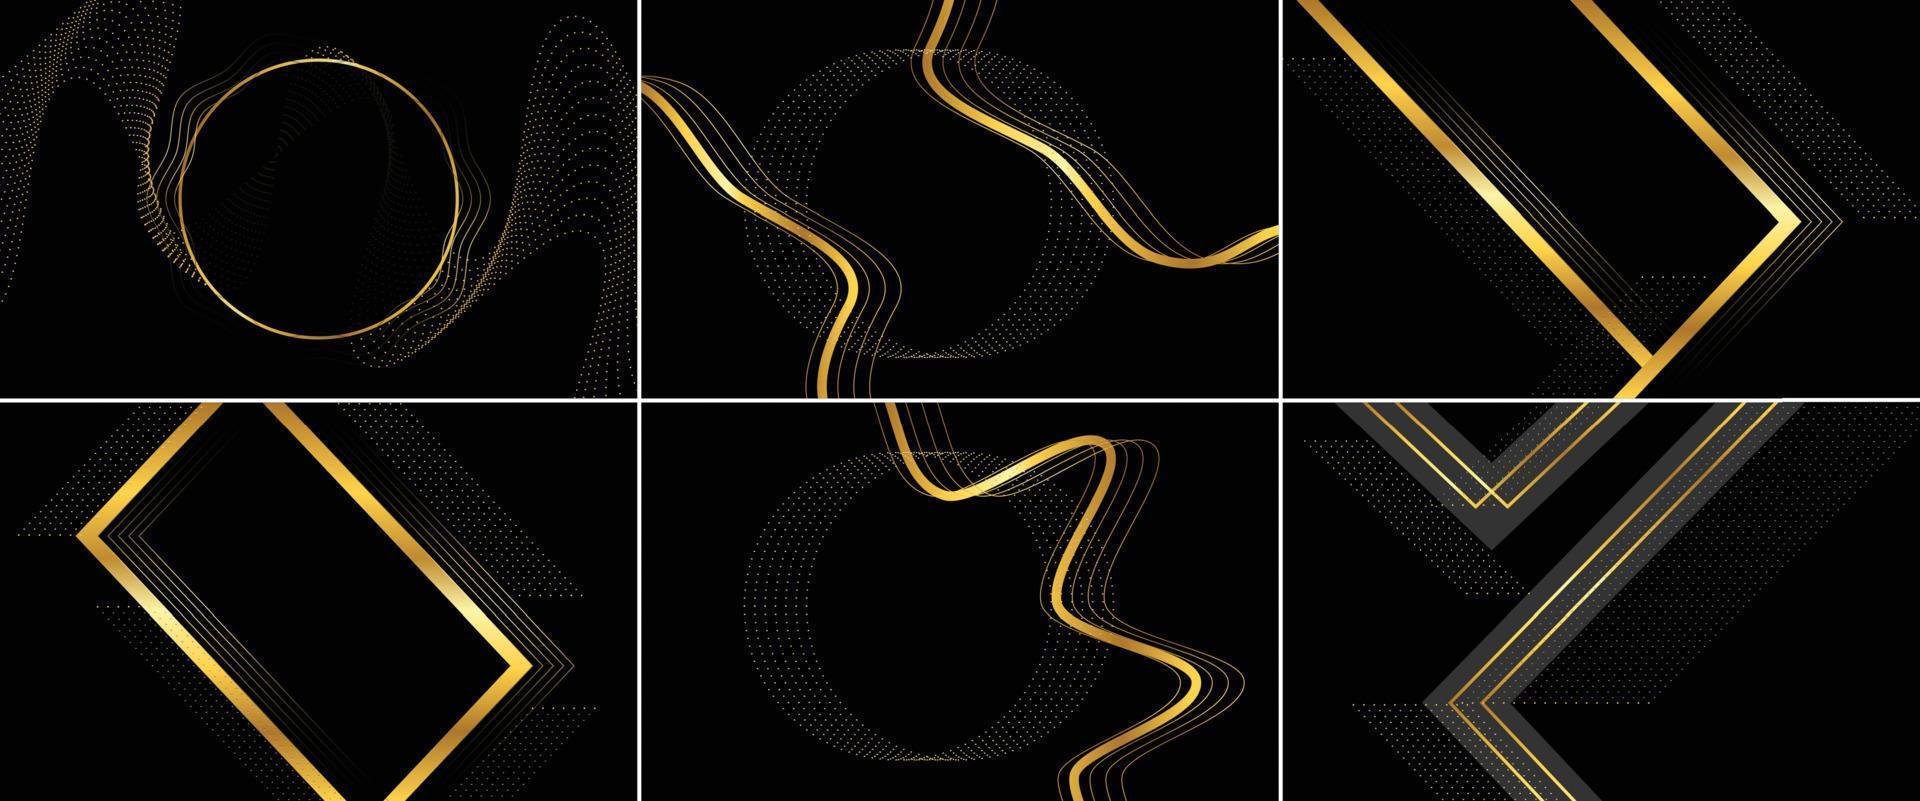 Black stripe with gold border on a dark background vector